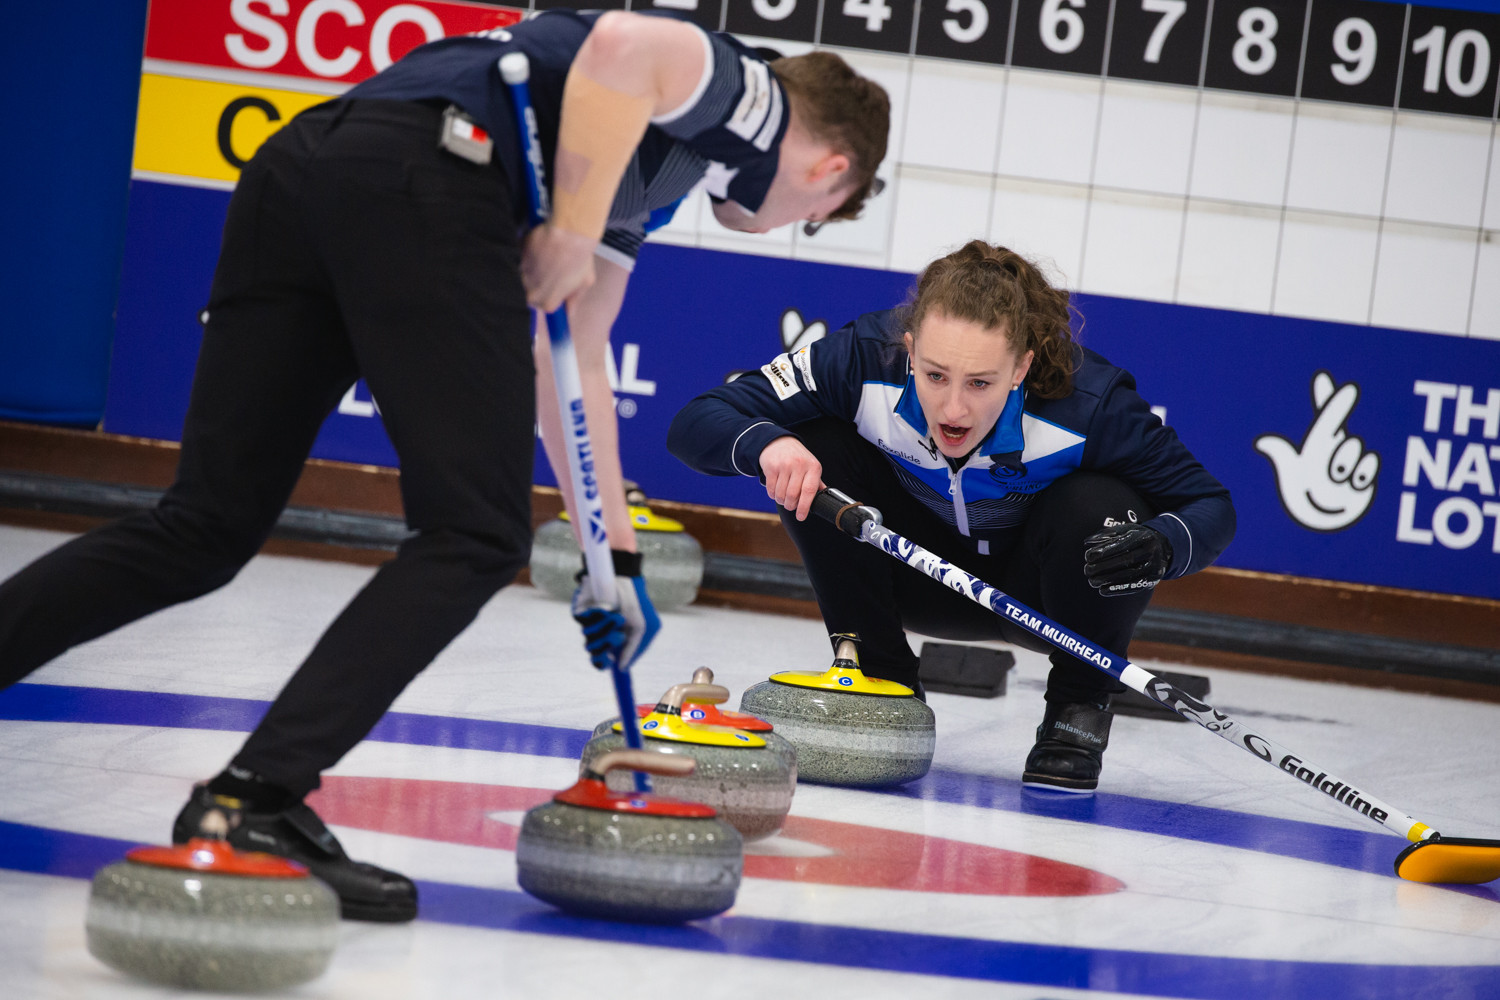 Scotland and Norway reach World Mixed Doubles Curling Championship final